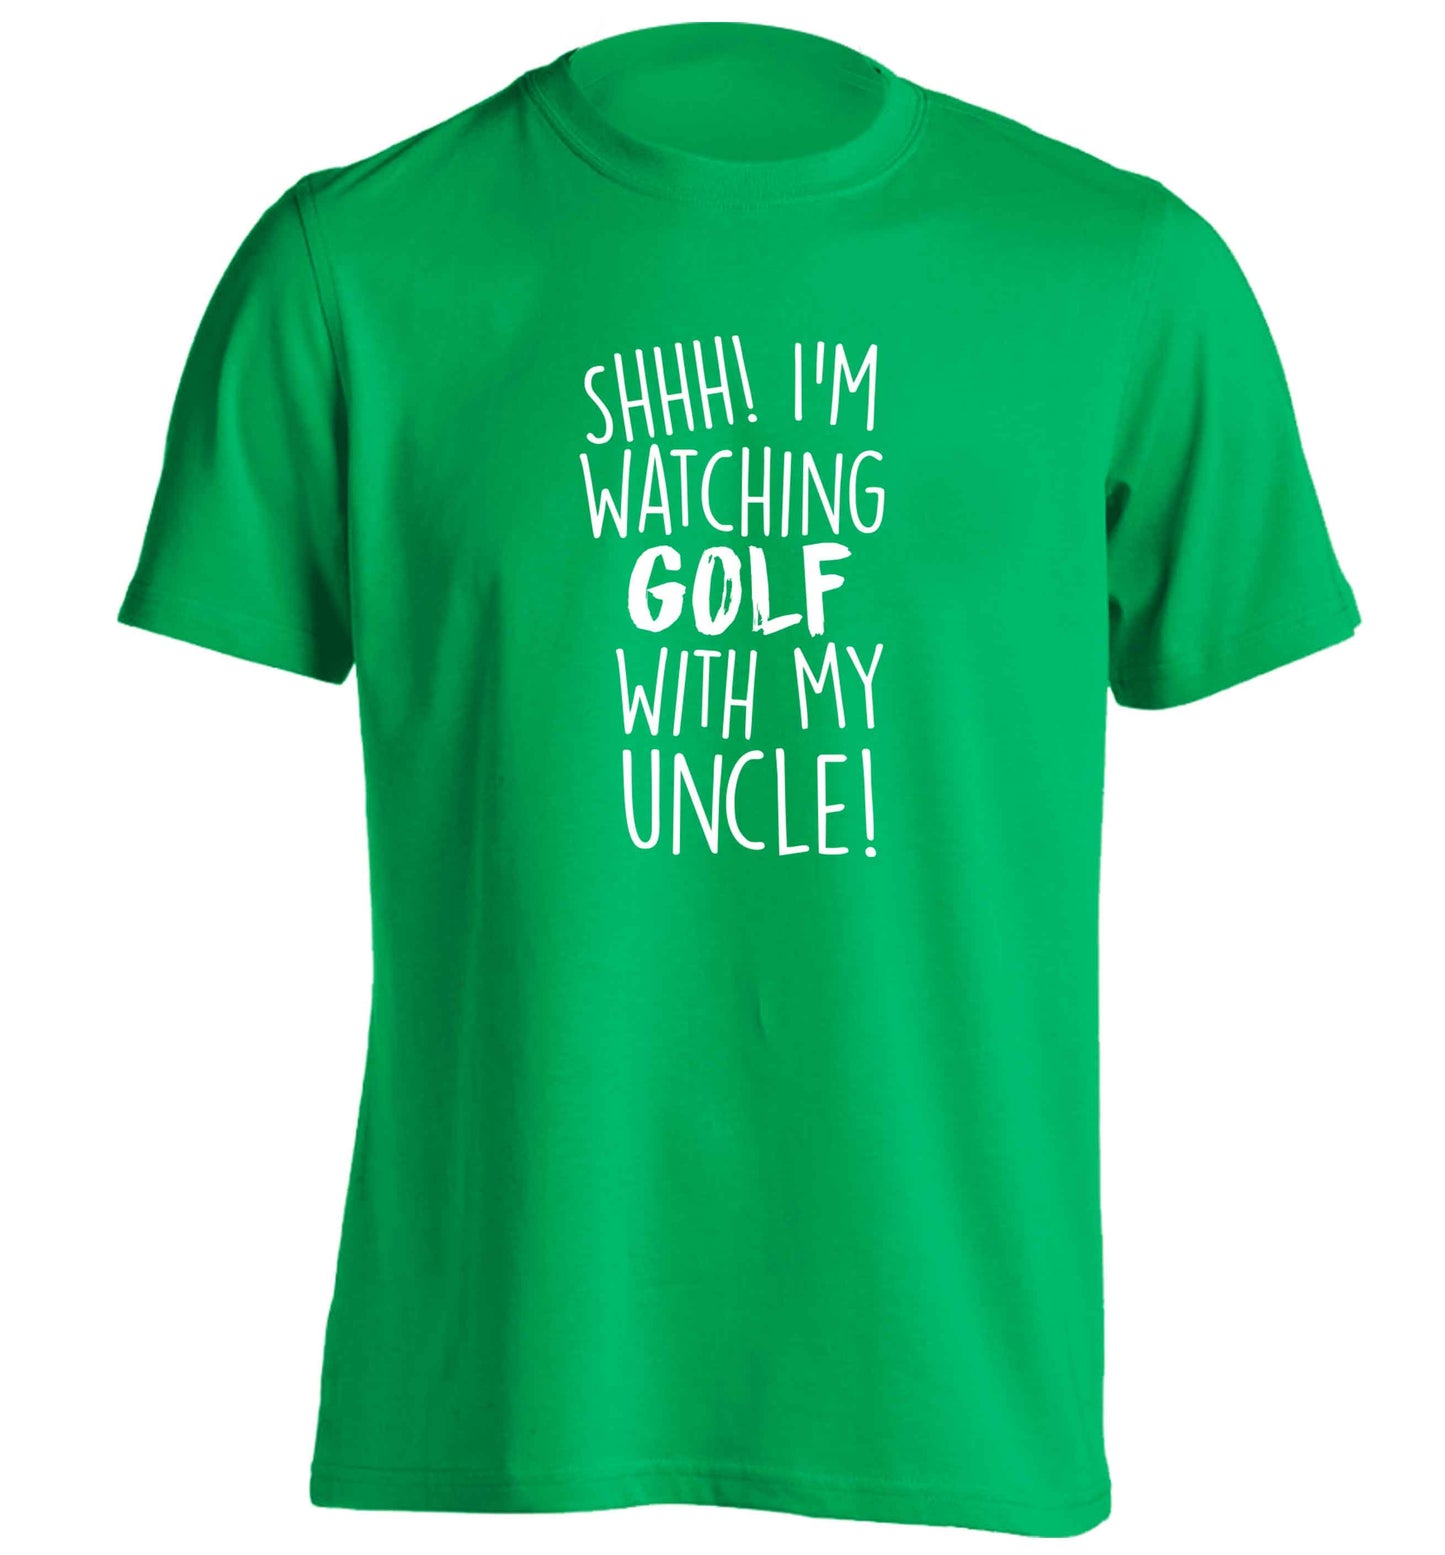 Shh I'm watching golf with my uncle adults unisex green Tshirt 2XL